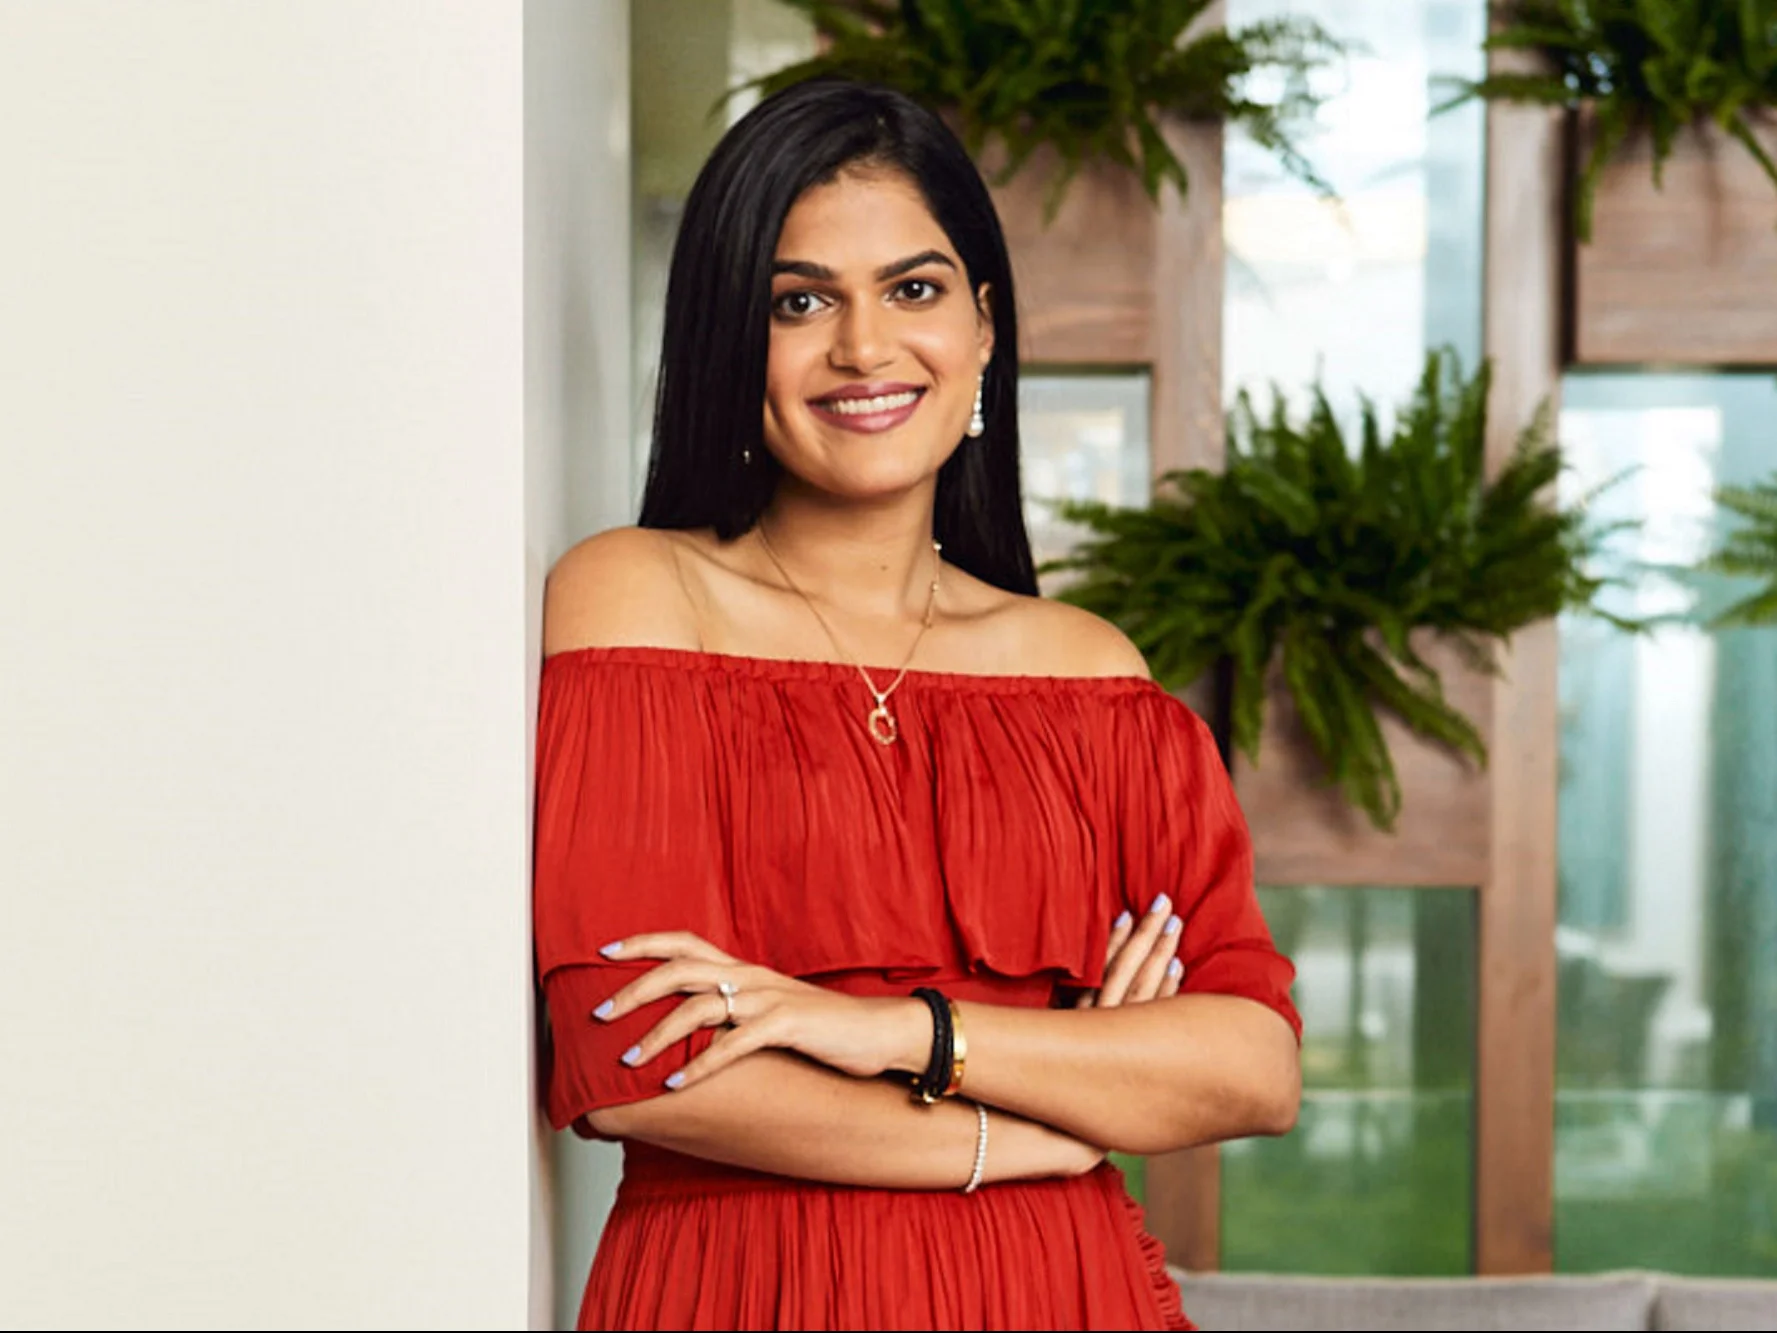 Nykaa Fashion CEO: Now's Ideal for Building a Fashion Brand